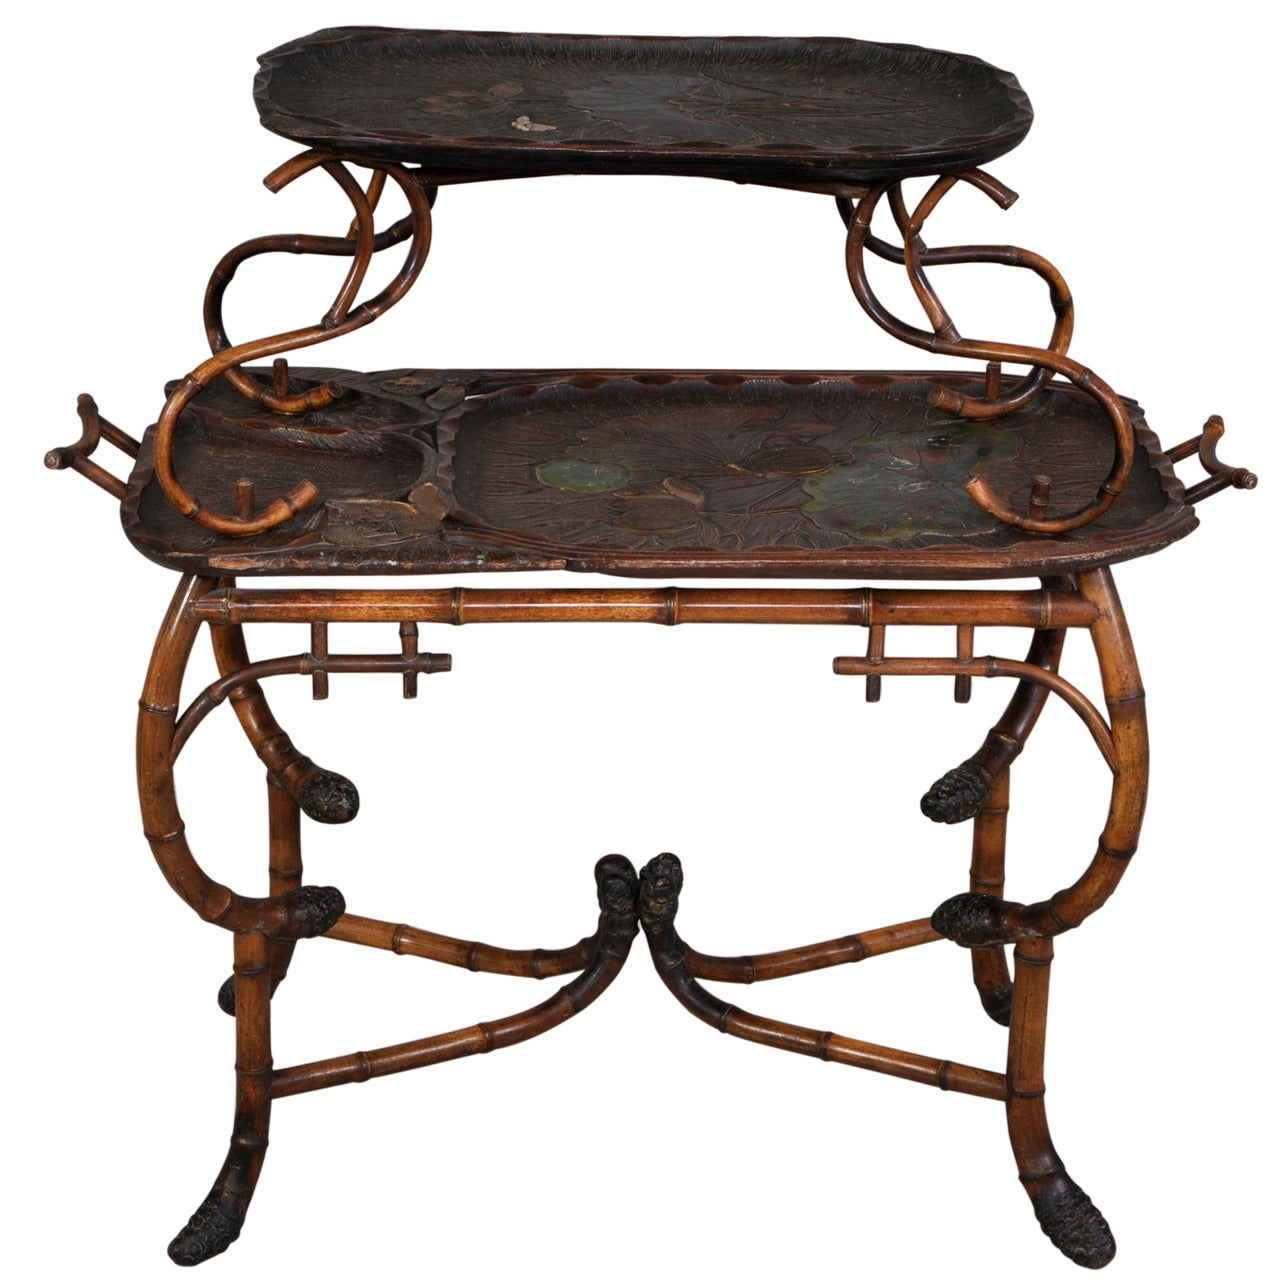 Daï Nippon - Bamboo Tea Table with Engraved and Lacquered Decor For Sale